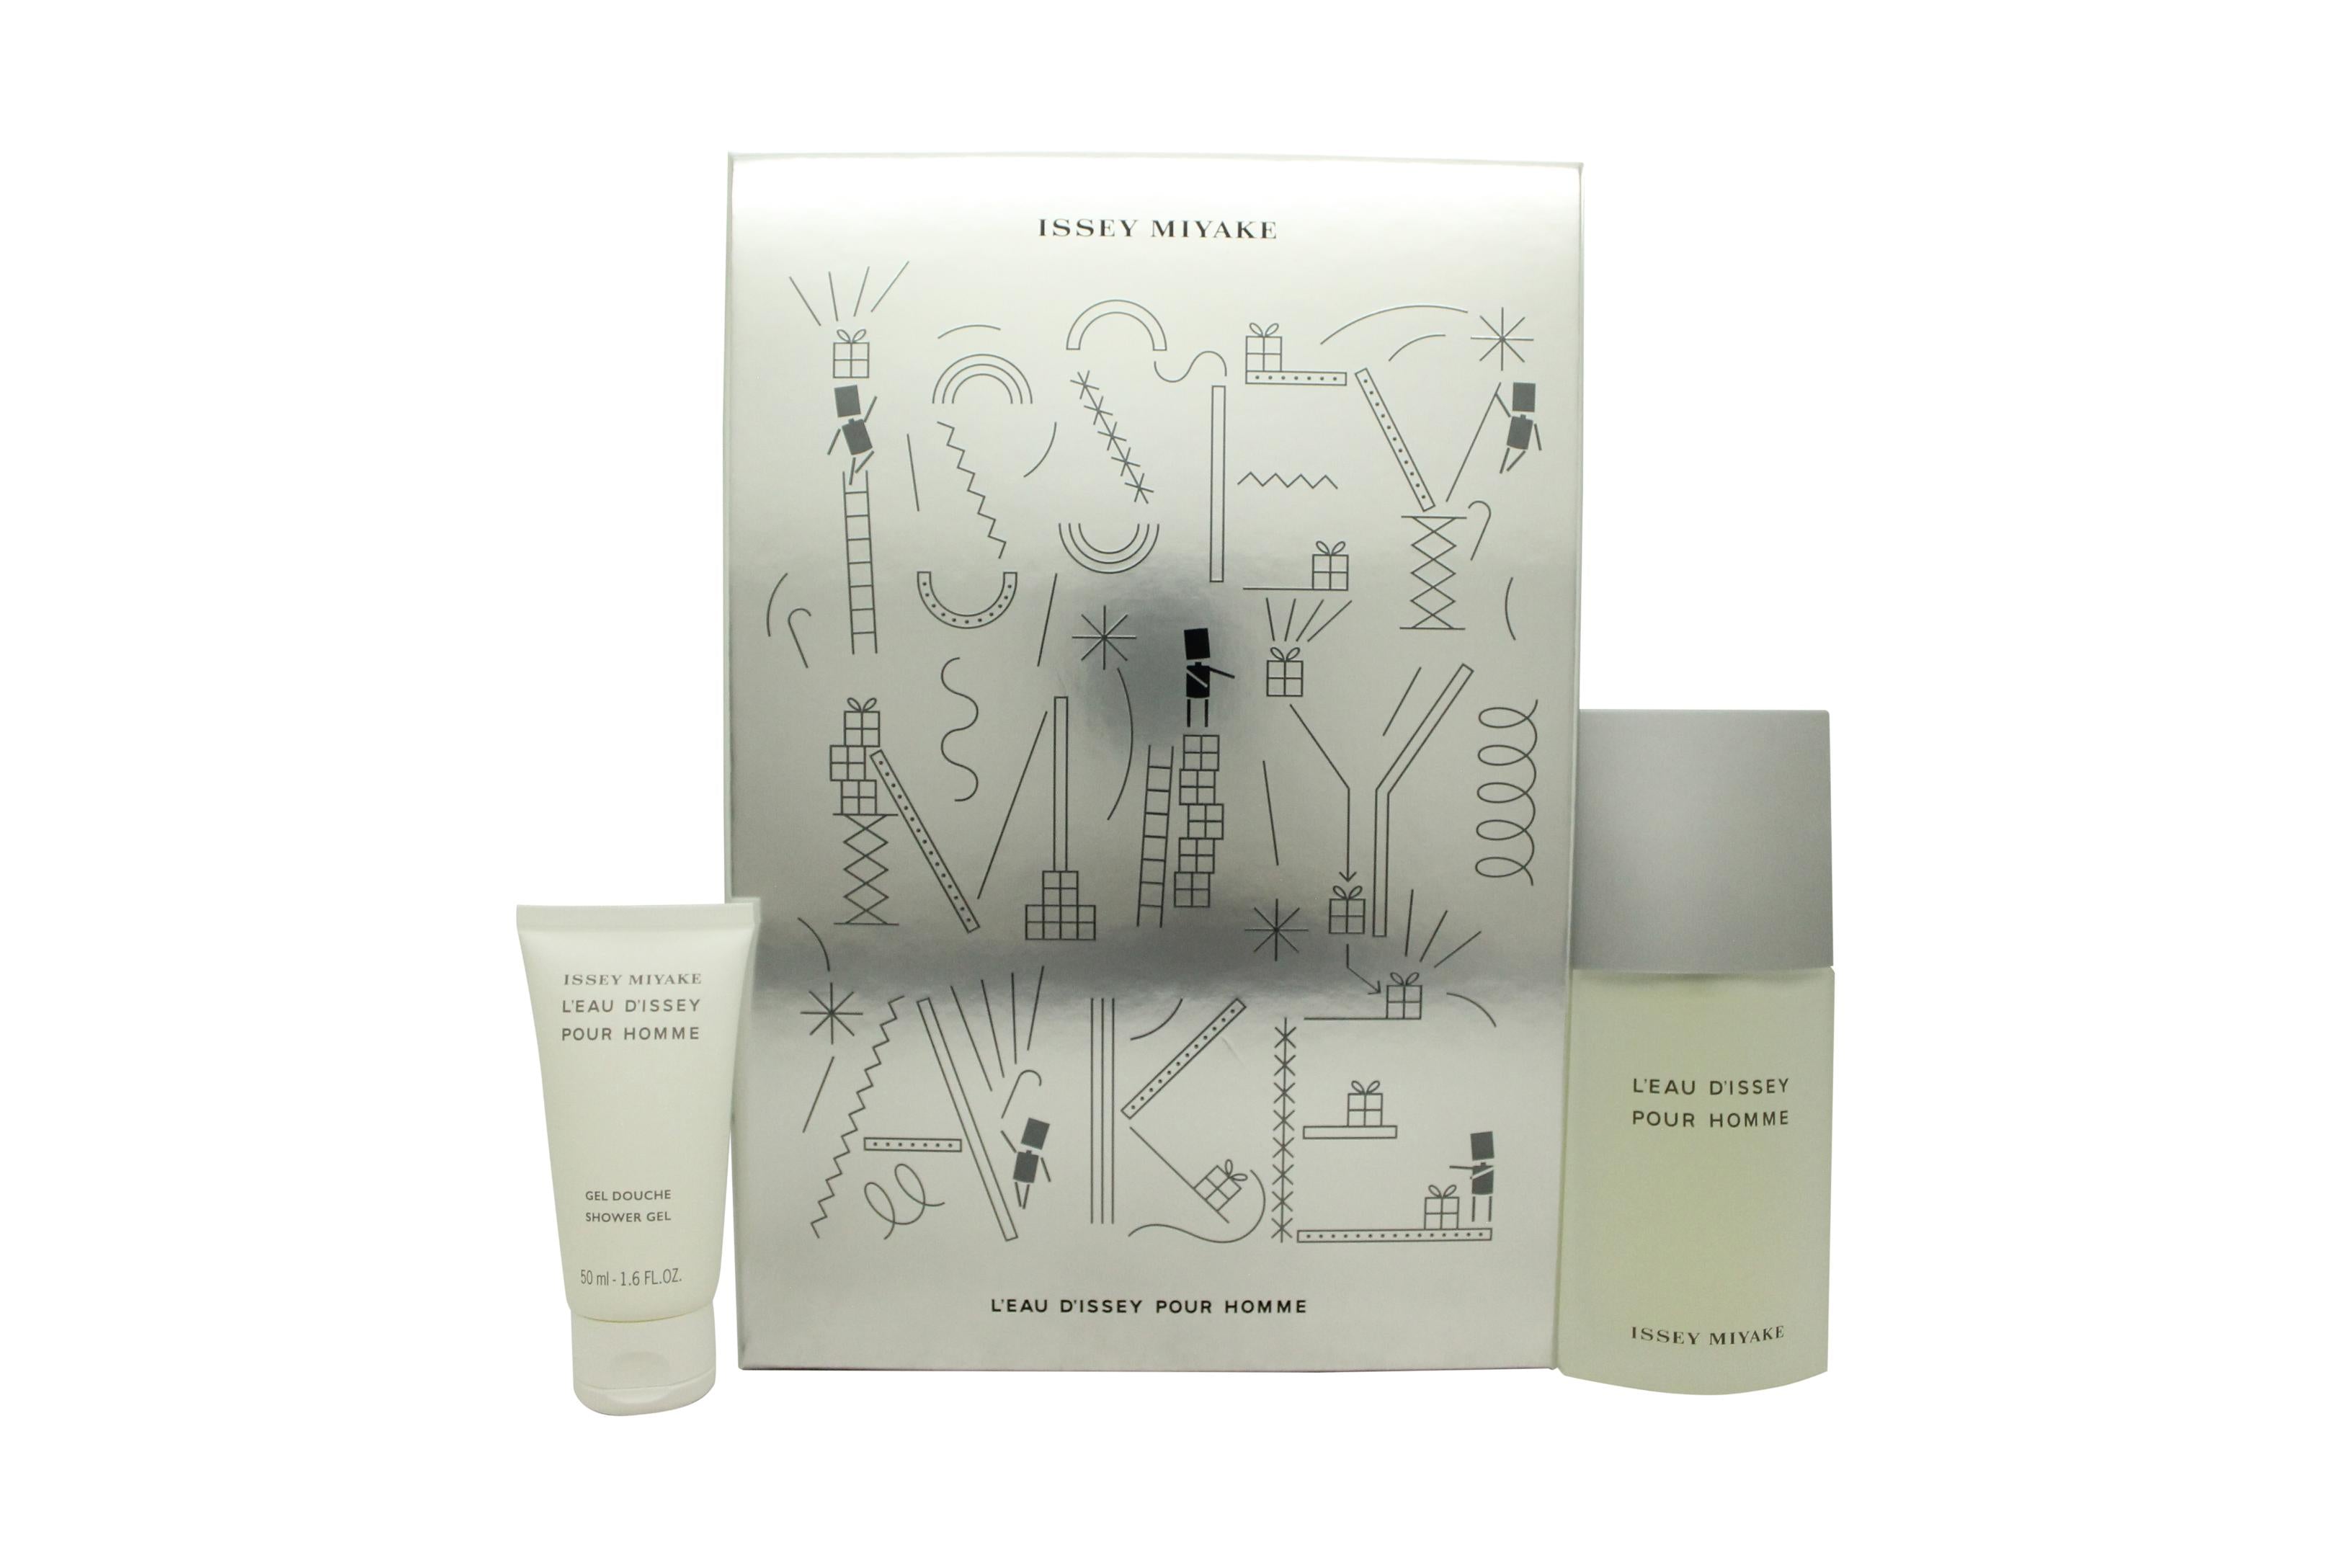 View Issey Miyake LEau dIssey Pour Homme Gift Set 75ml EDT 50ml Shower Gel information